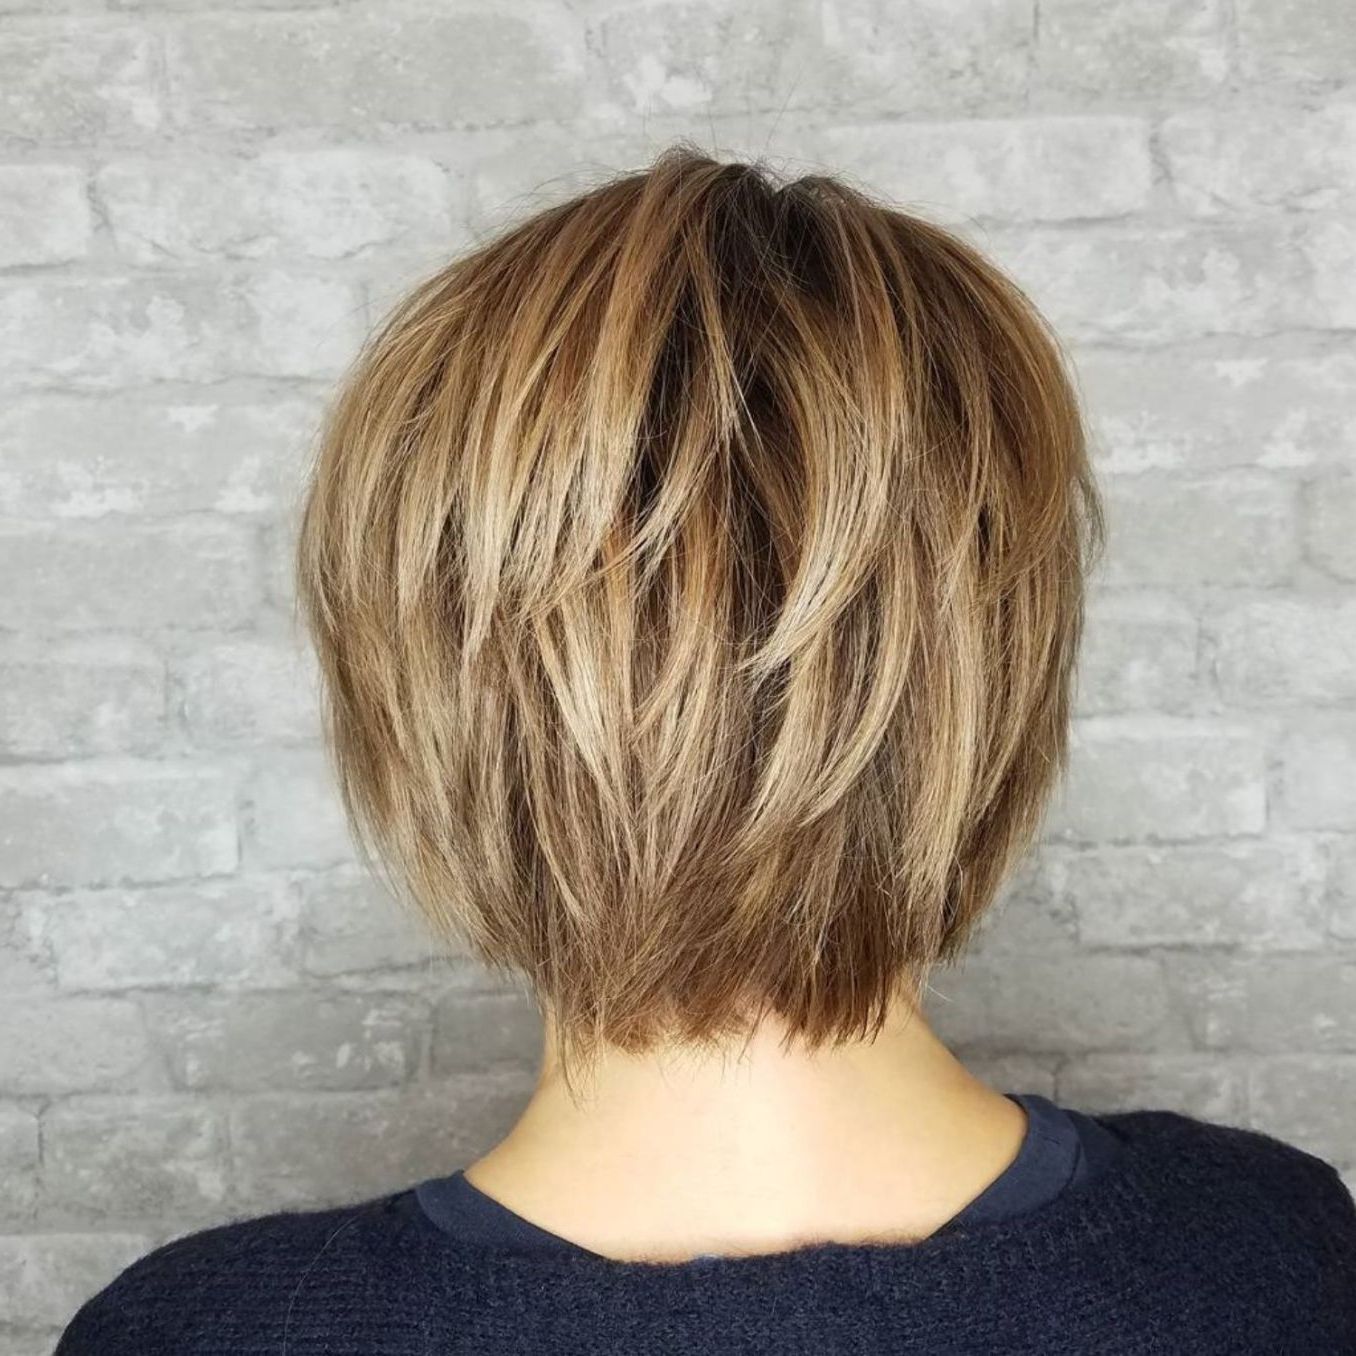 60 Short Shag Hairstyles That You Simply Can't Miss | Uñas Throughout Recent Razored Haircuts With Precise Nape And Sideburns (View 10 of 15)